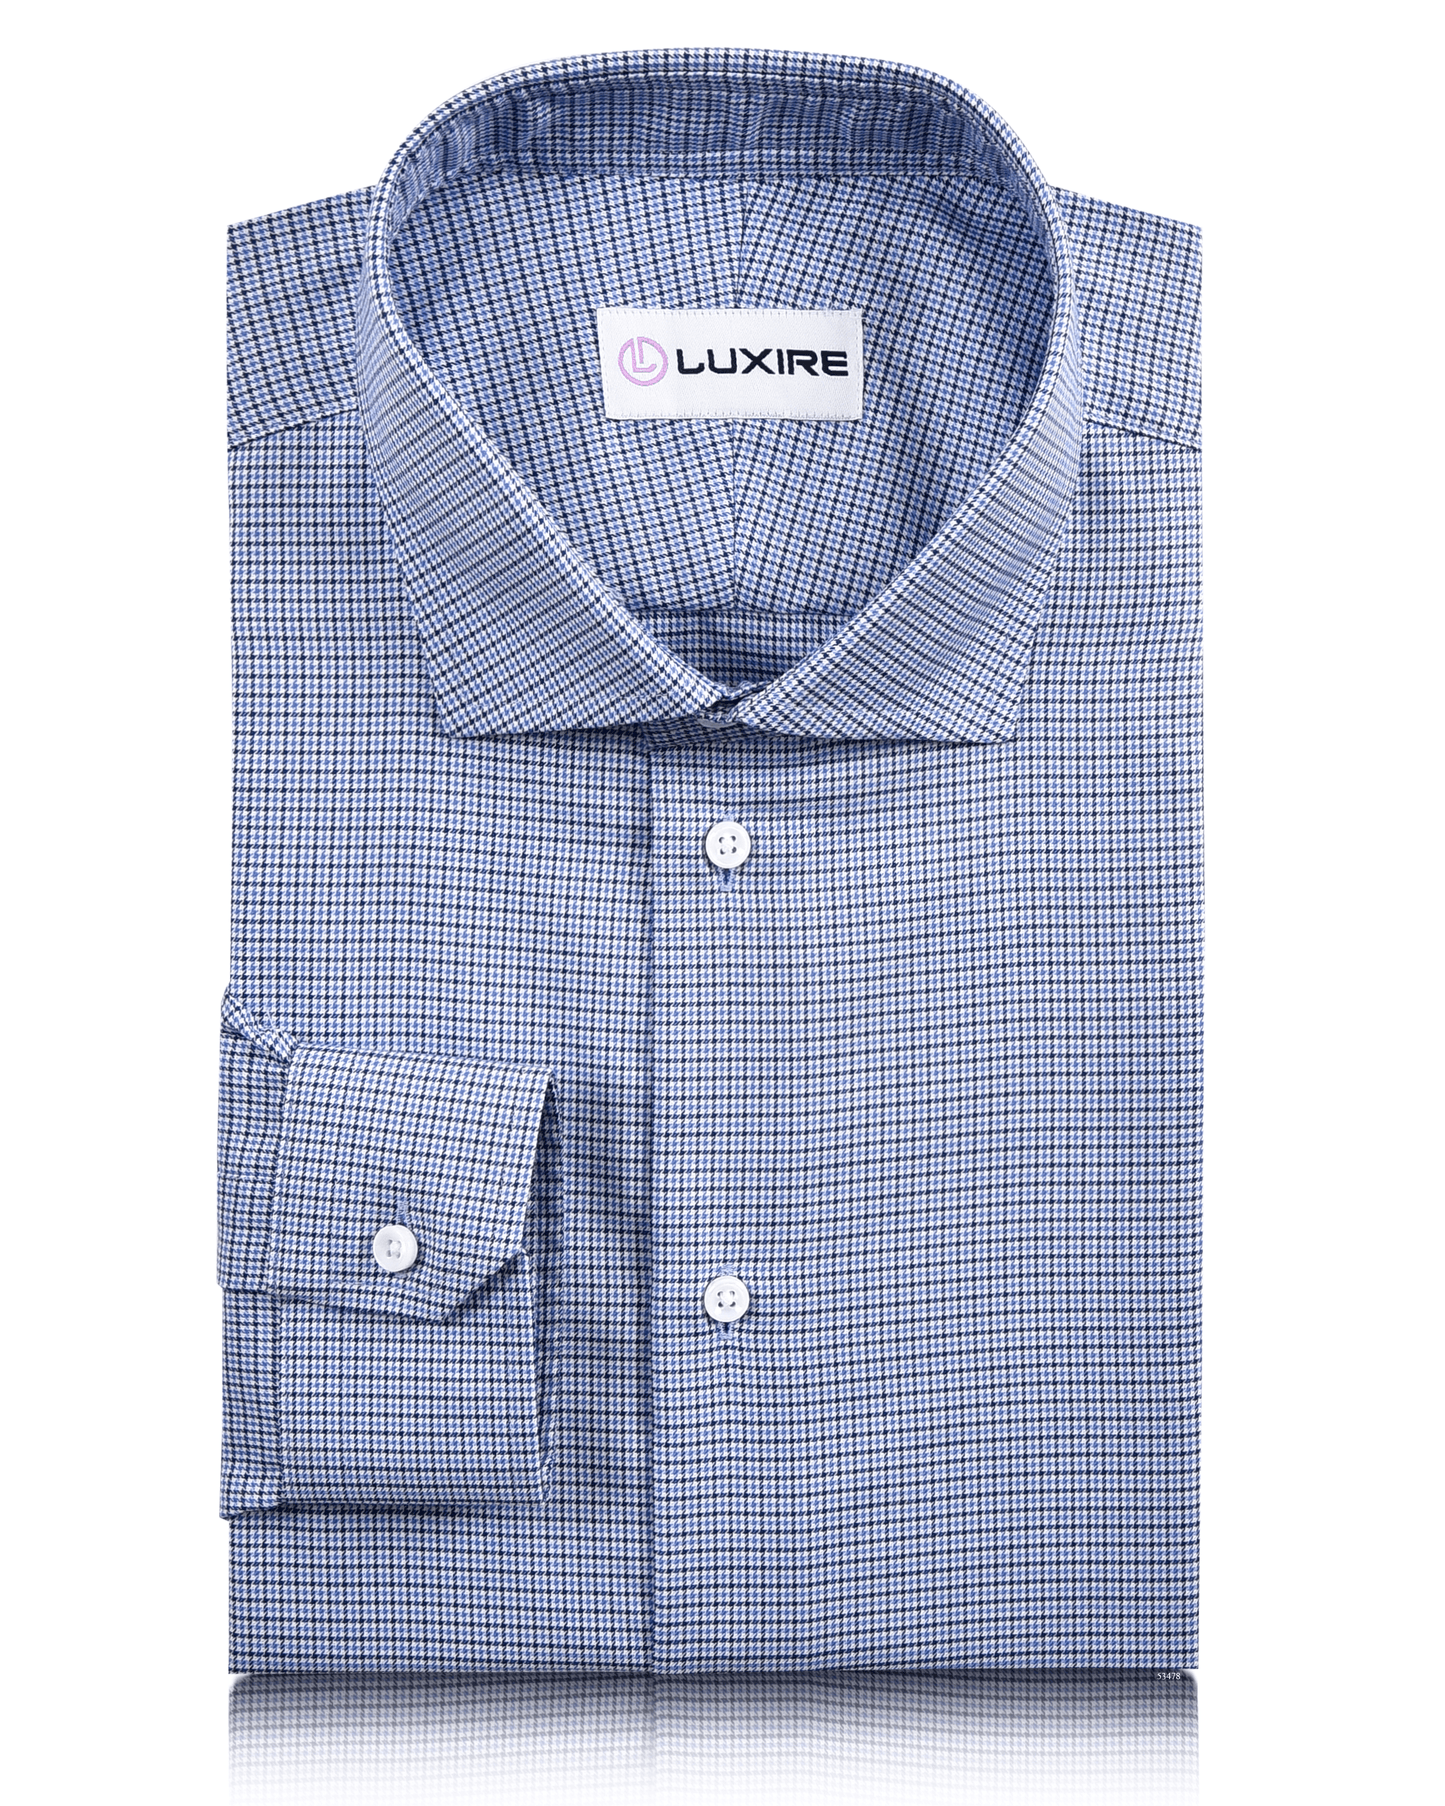 Blue White Micro Houndstooth Shirt